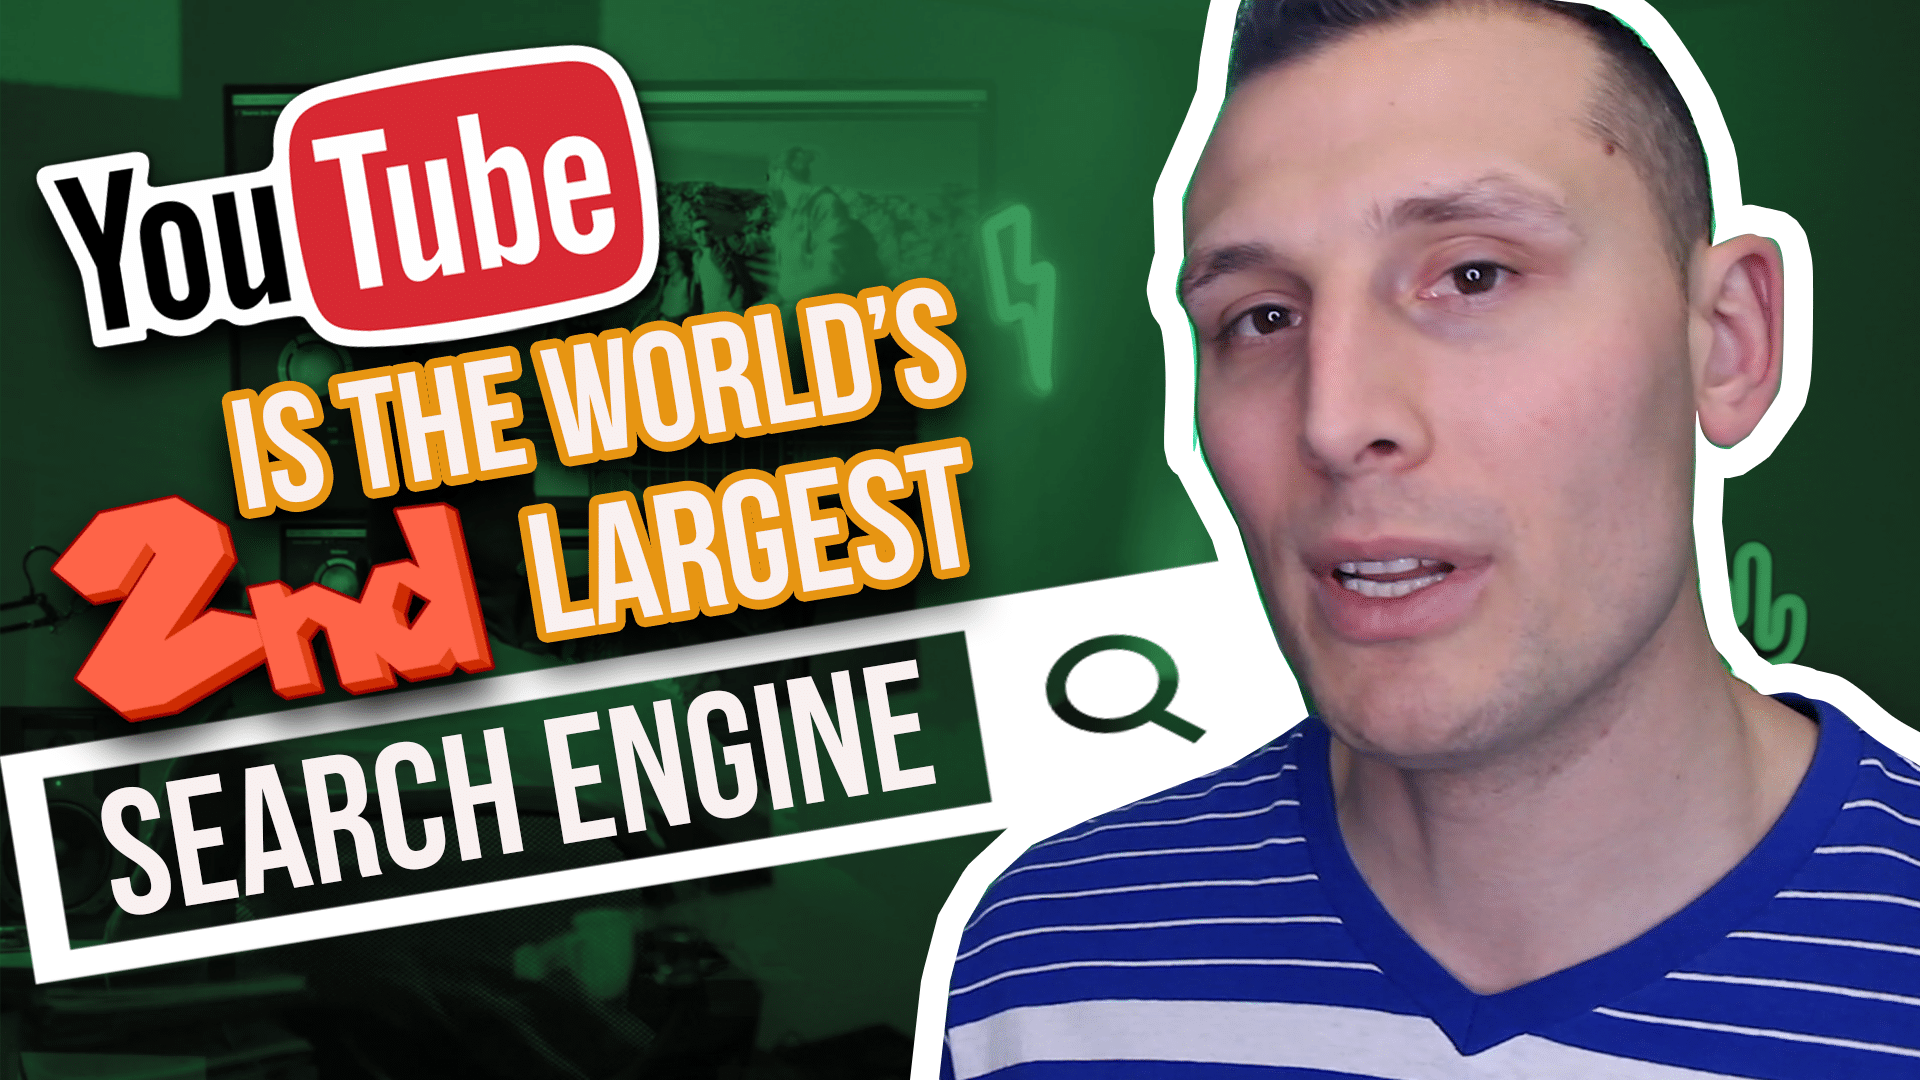 YouTube Is The World's 2nd Largest Search Engine